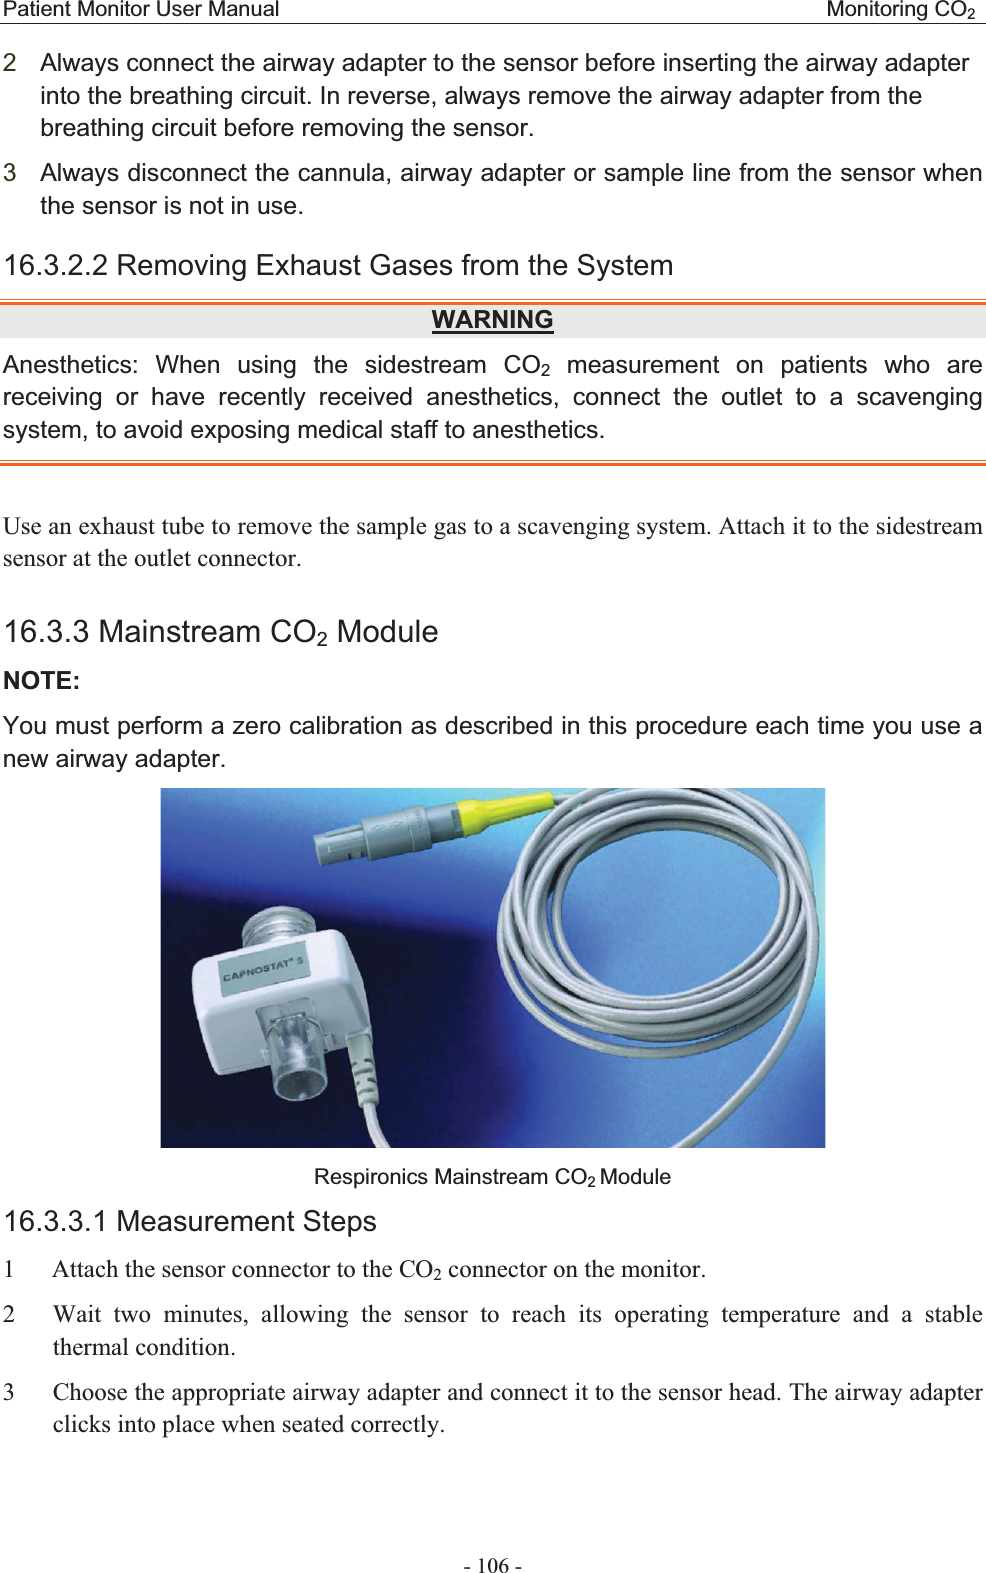 Patient Monitor User Manual                                                  Monitoring CO2 - 106 - 2Always connect the airway adapter to the sensor before inserting the airway adapter into the breathing circuit. In reverse, always remove the airway adapter from the breathing circuit before removing the sensor. 3Always disconnect the cannula, airway adapter or sample line from the sensor when the sensor is not in use. 16.3.2.2 Removing Exhaust Gases from the System WARNINGAnesthetics: When using the sidestream CO2 measurement on patients who are receiving or have recently received anesthetics, connect the outlet to a scavenging system, to avoid exposing medical staff to anesthetics. Use an exhaust tube to remove the sample gas to a scavenging system. Attach it to the sidestream sensor at the outlet connector. 16.3.3 Mainstream CO2 ModuleNOTE:You must perform a zero calibration as described in this procedure each time you use a new airway adapter.  Respironics Mainstream CO2Module 16.3.3.1 Measurement Steps1    Attach the sensor connector to the CO2 connector on the monitor. 2   Wait two minutes, allowing the sensor to reach its operating temperature and a stable thermal condition. 3    Choose the appropriate airway adapter and connect it to the sensor head. The airway adapter clicks into place when seated correctly. 